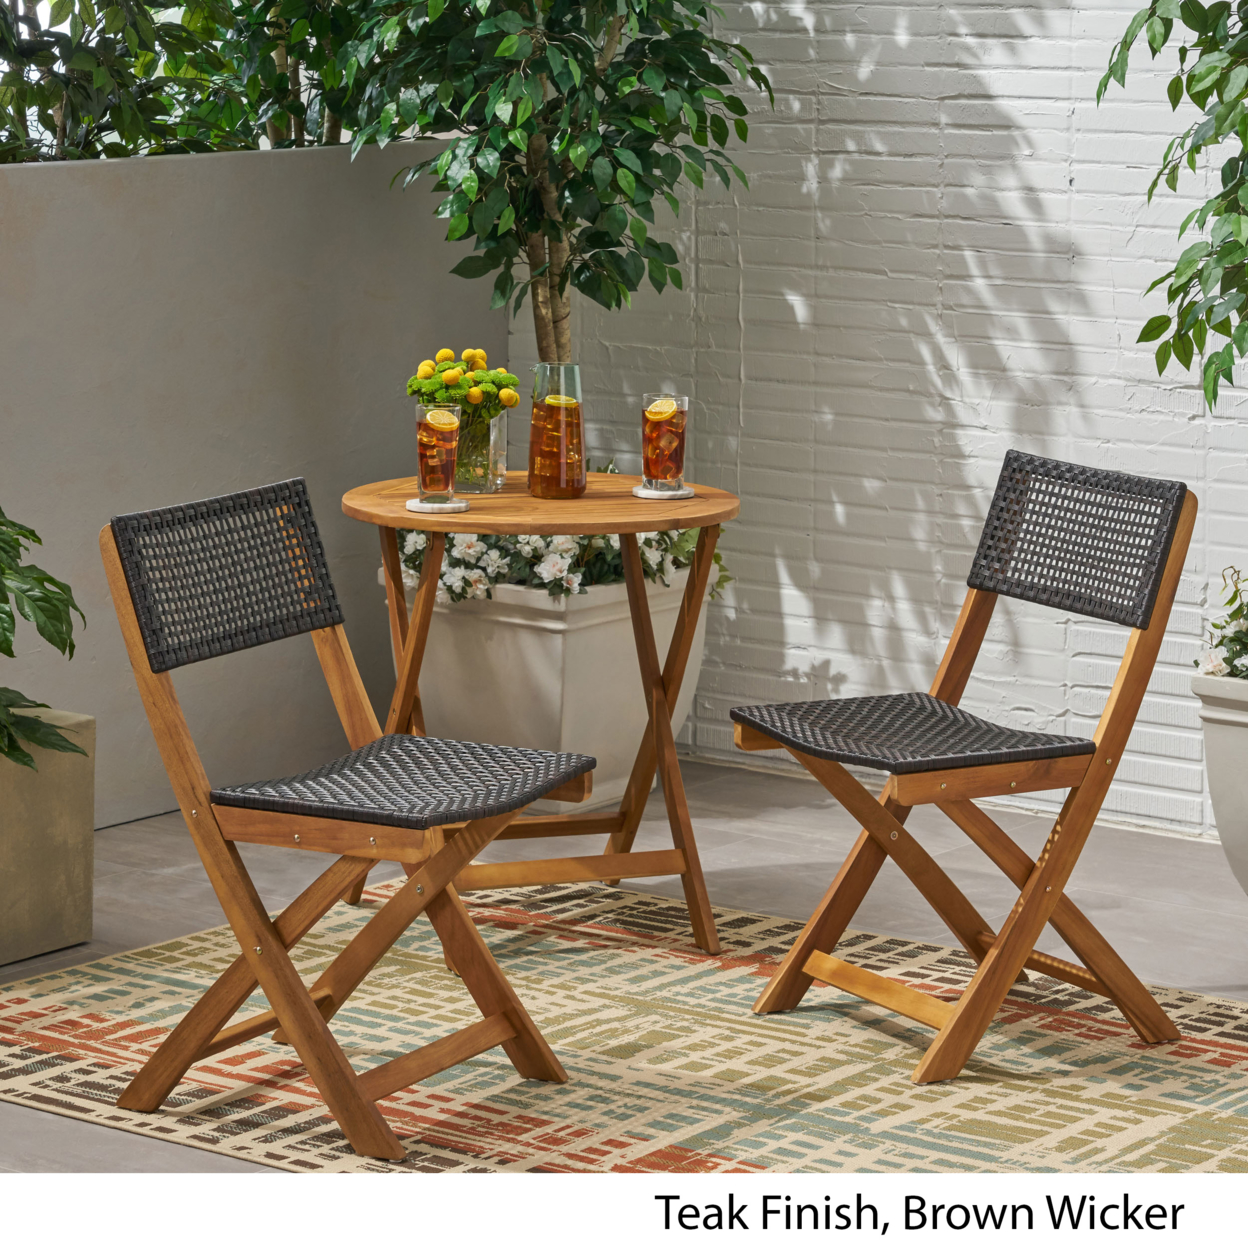 Ida Outdoor Acacia Wood Foldable Bistro Chairs With Wicker Seating (Set Of 2) - Dark Gray + Brown Wicker